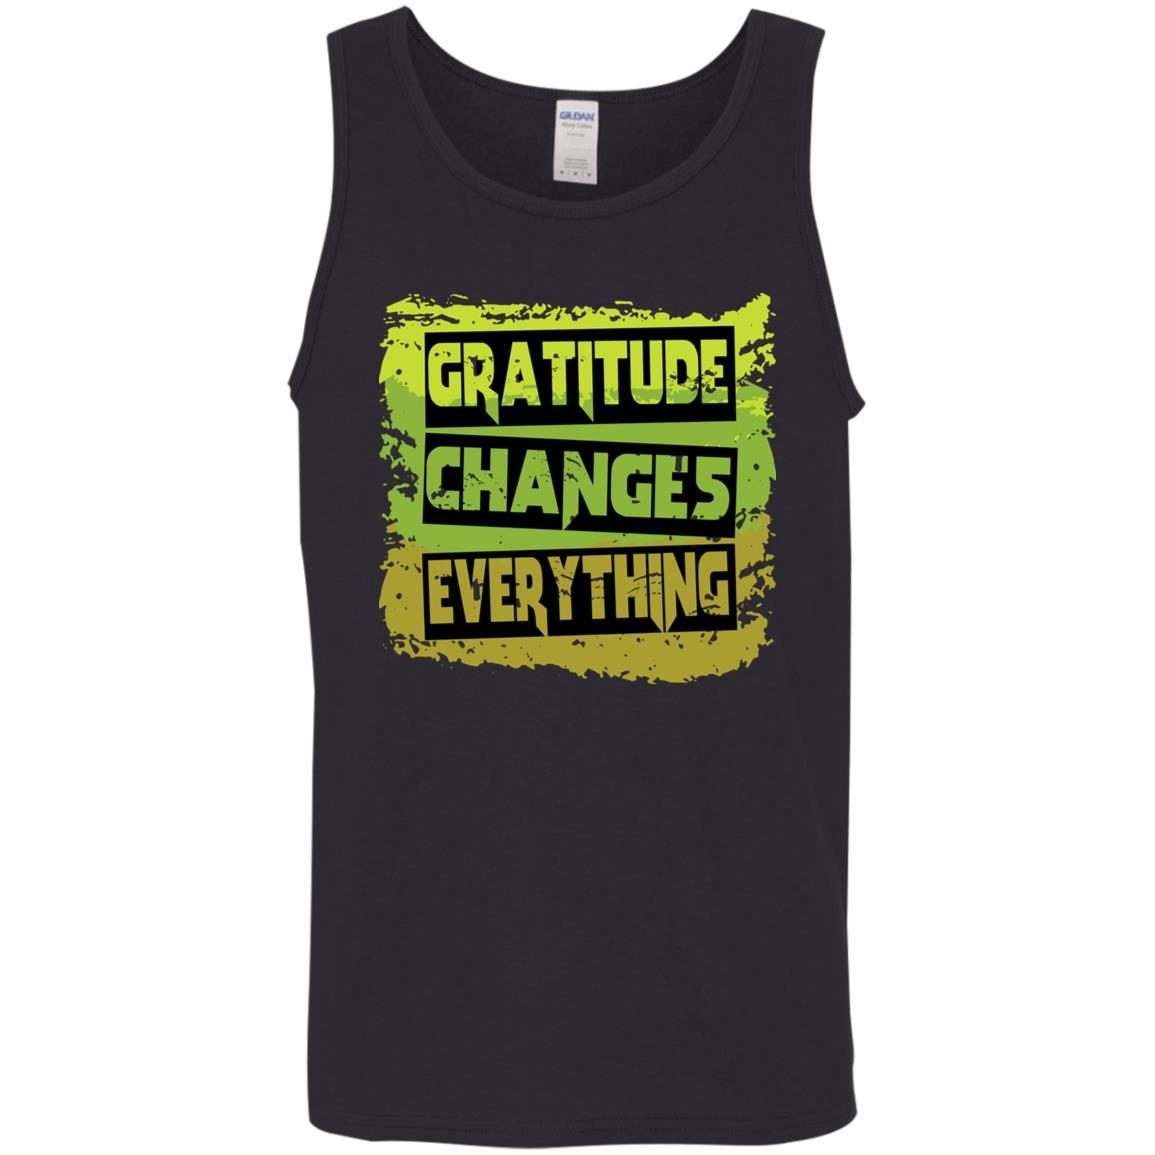 Gratitude Changes Everything Funny Quote shirt 5